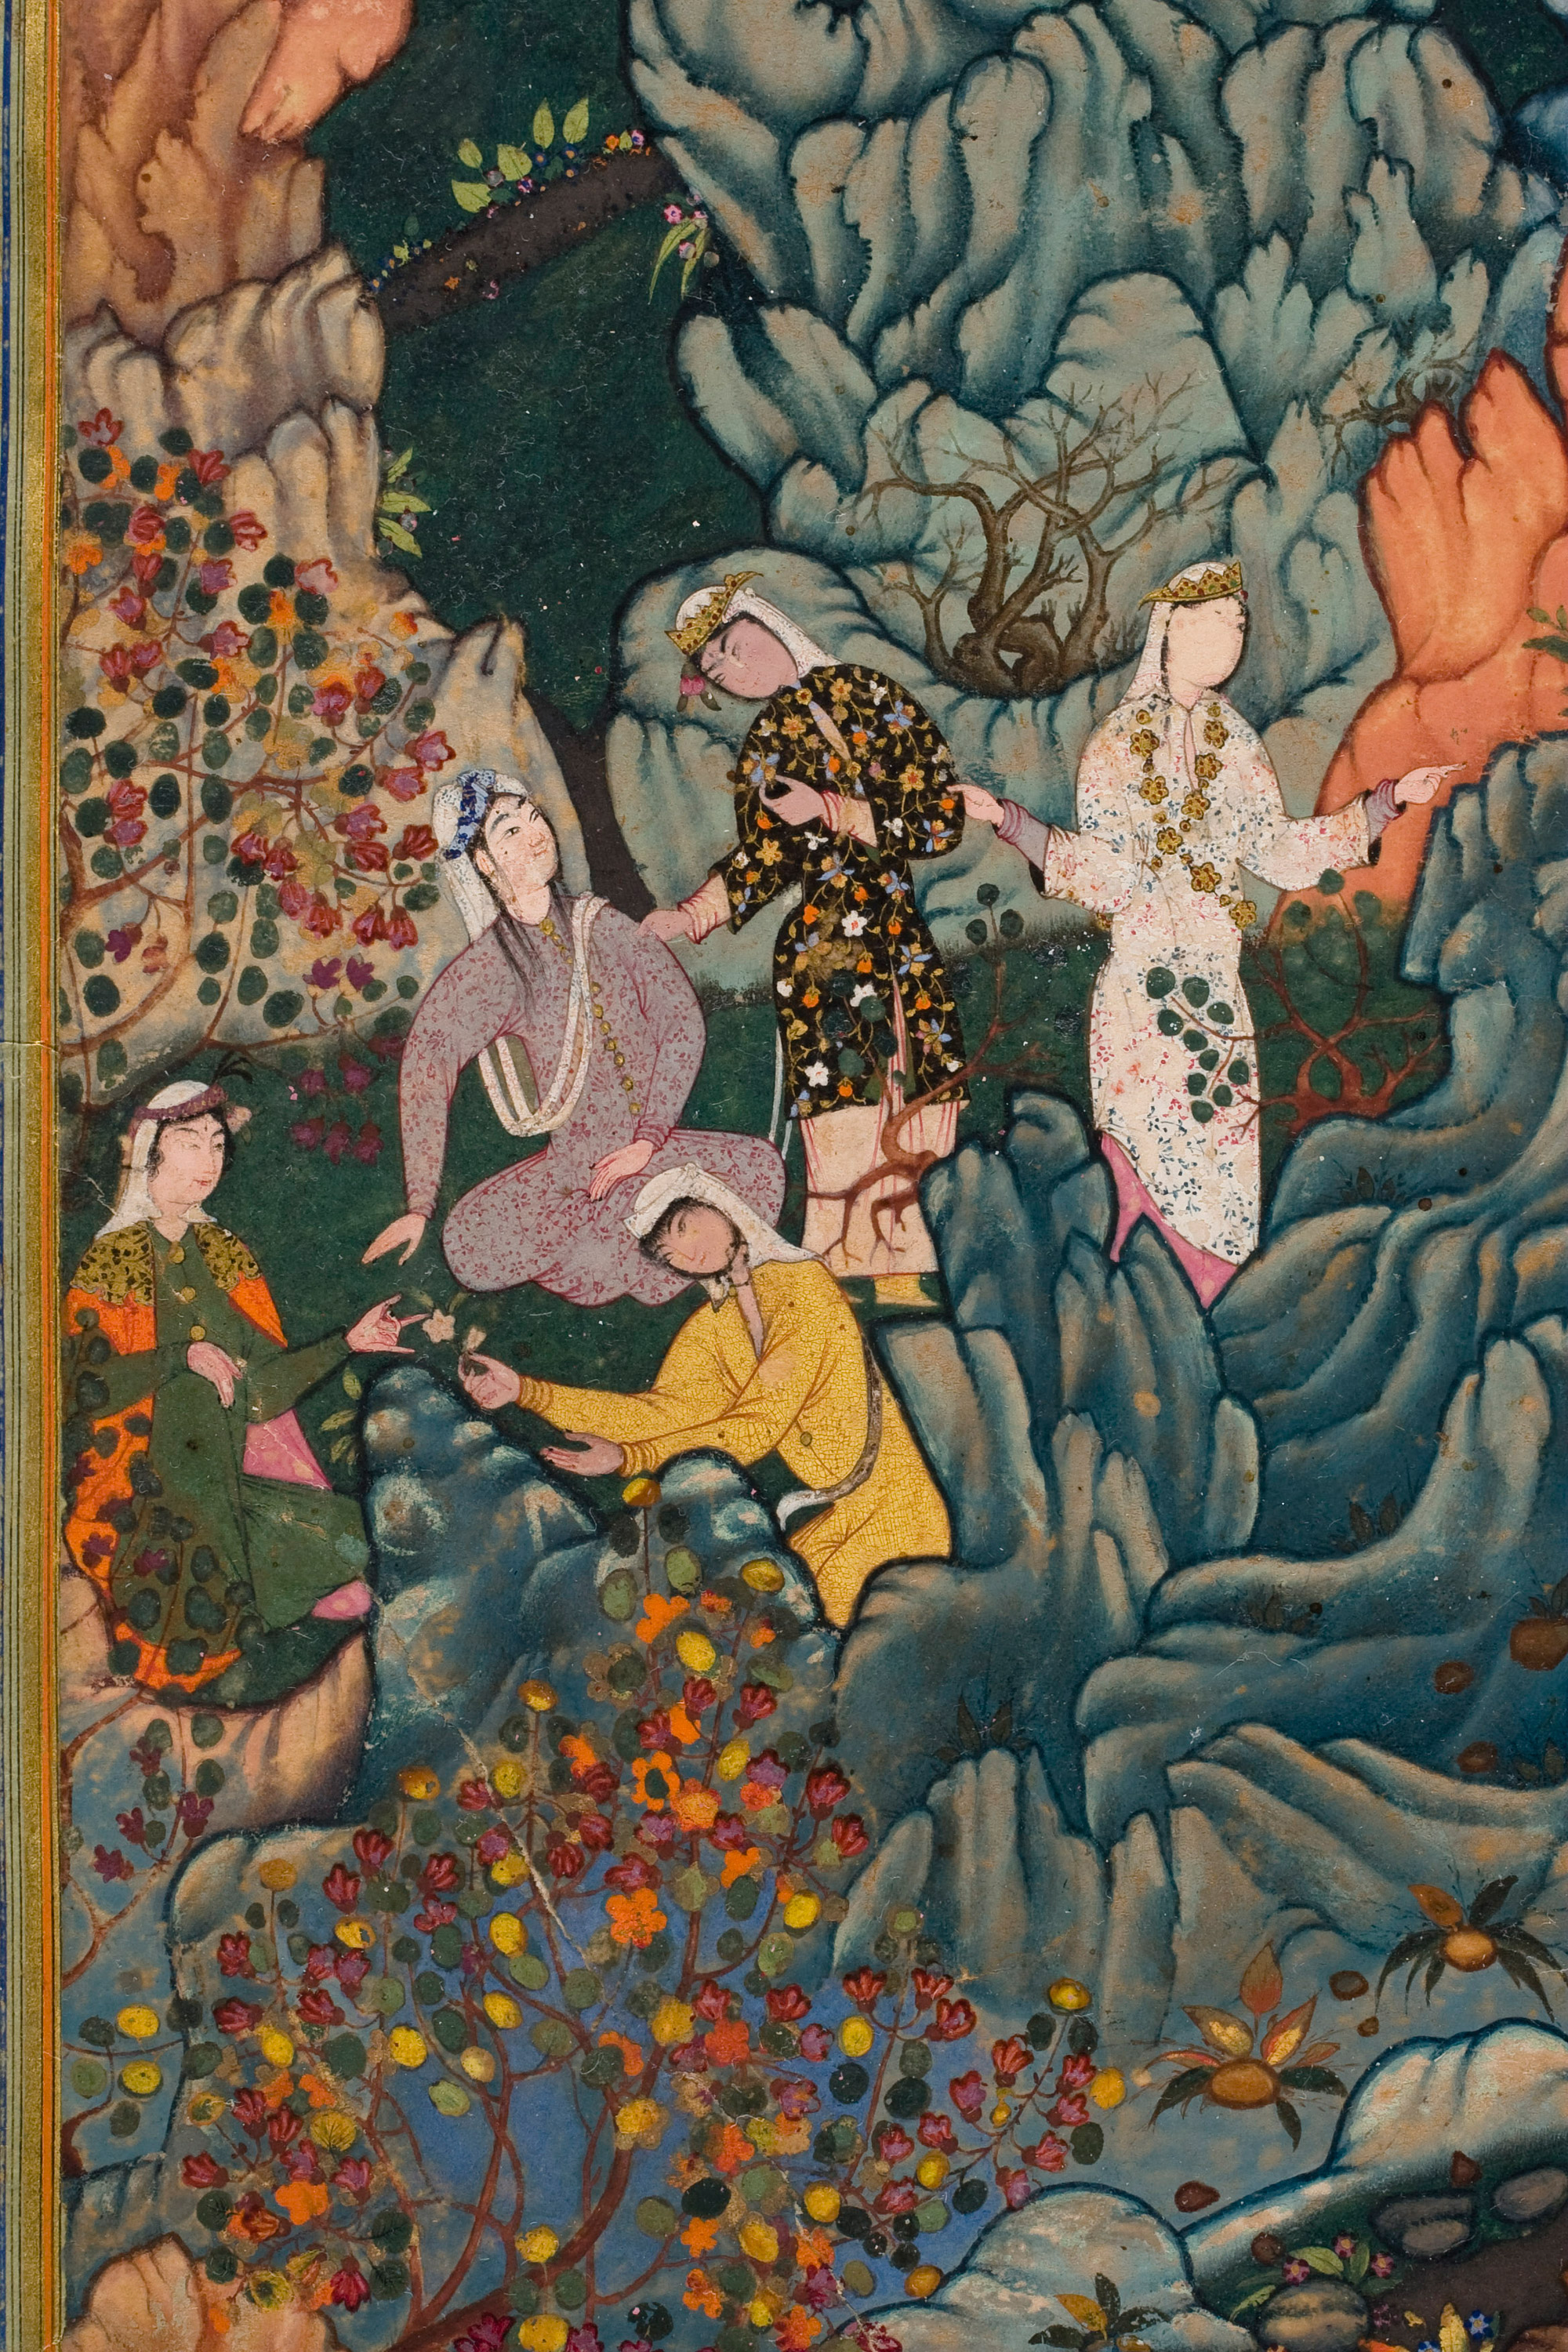 Laura E. Parodi and Bruce Wannell: The Earliest Datable Mughal Painting